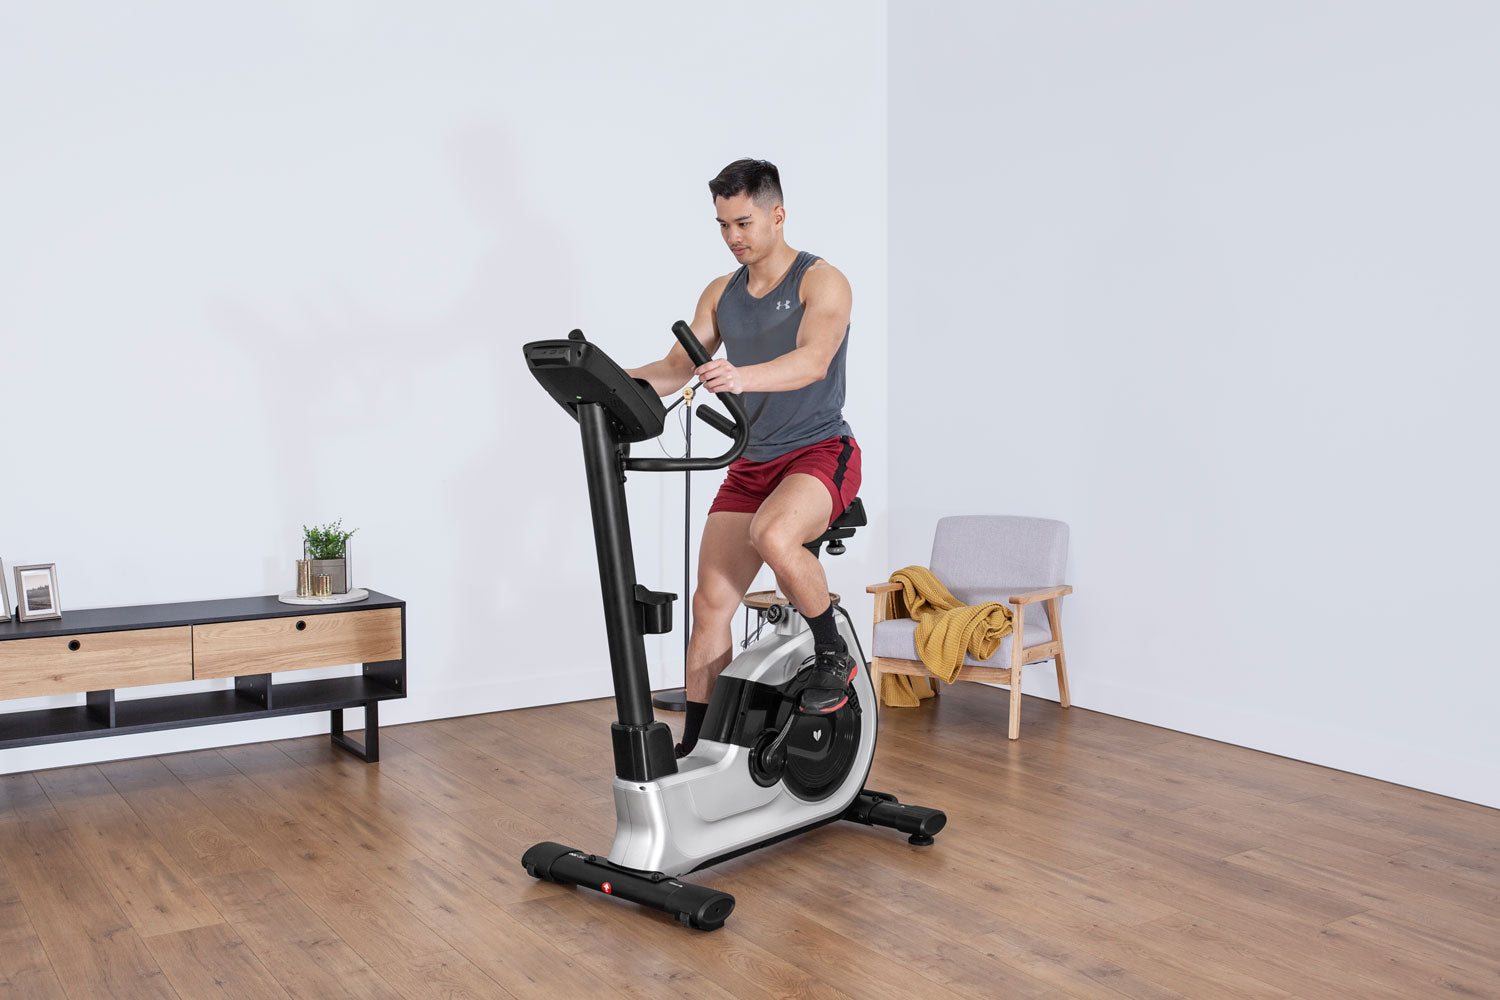 Are Exercise Bikes Good for Weight Loss?